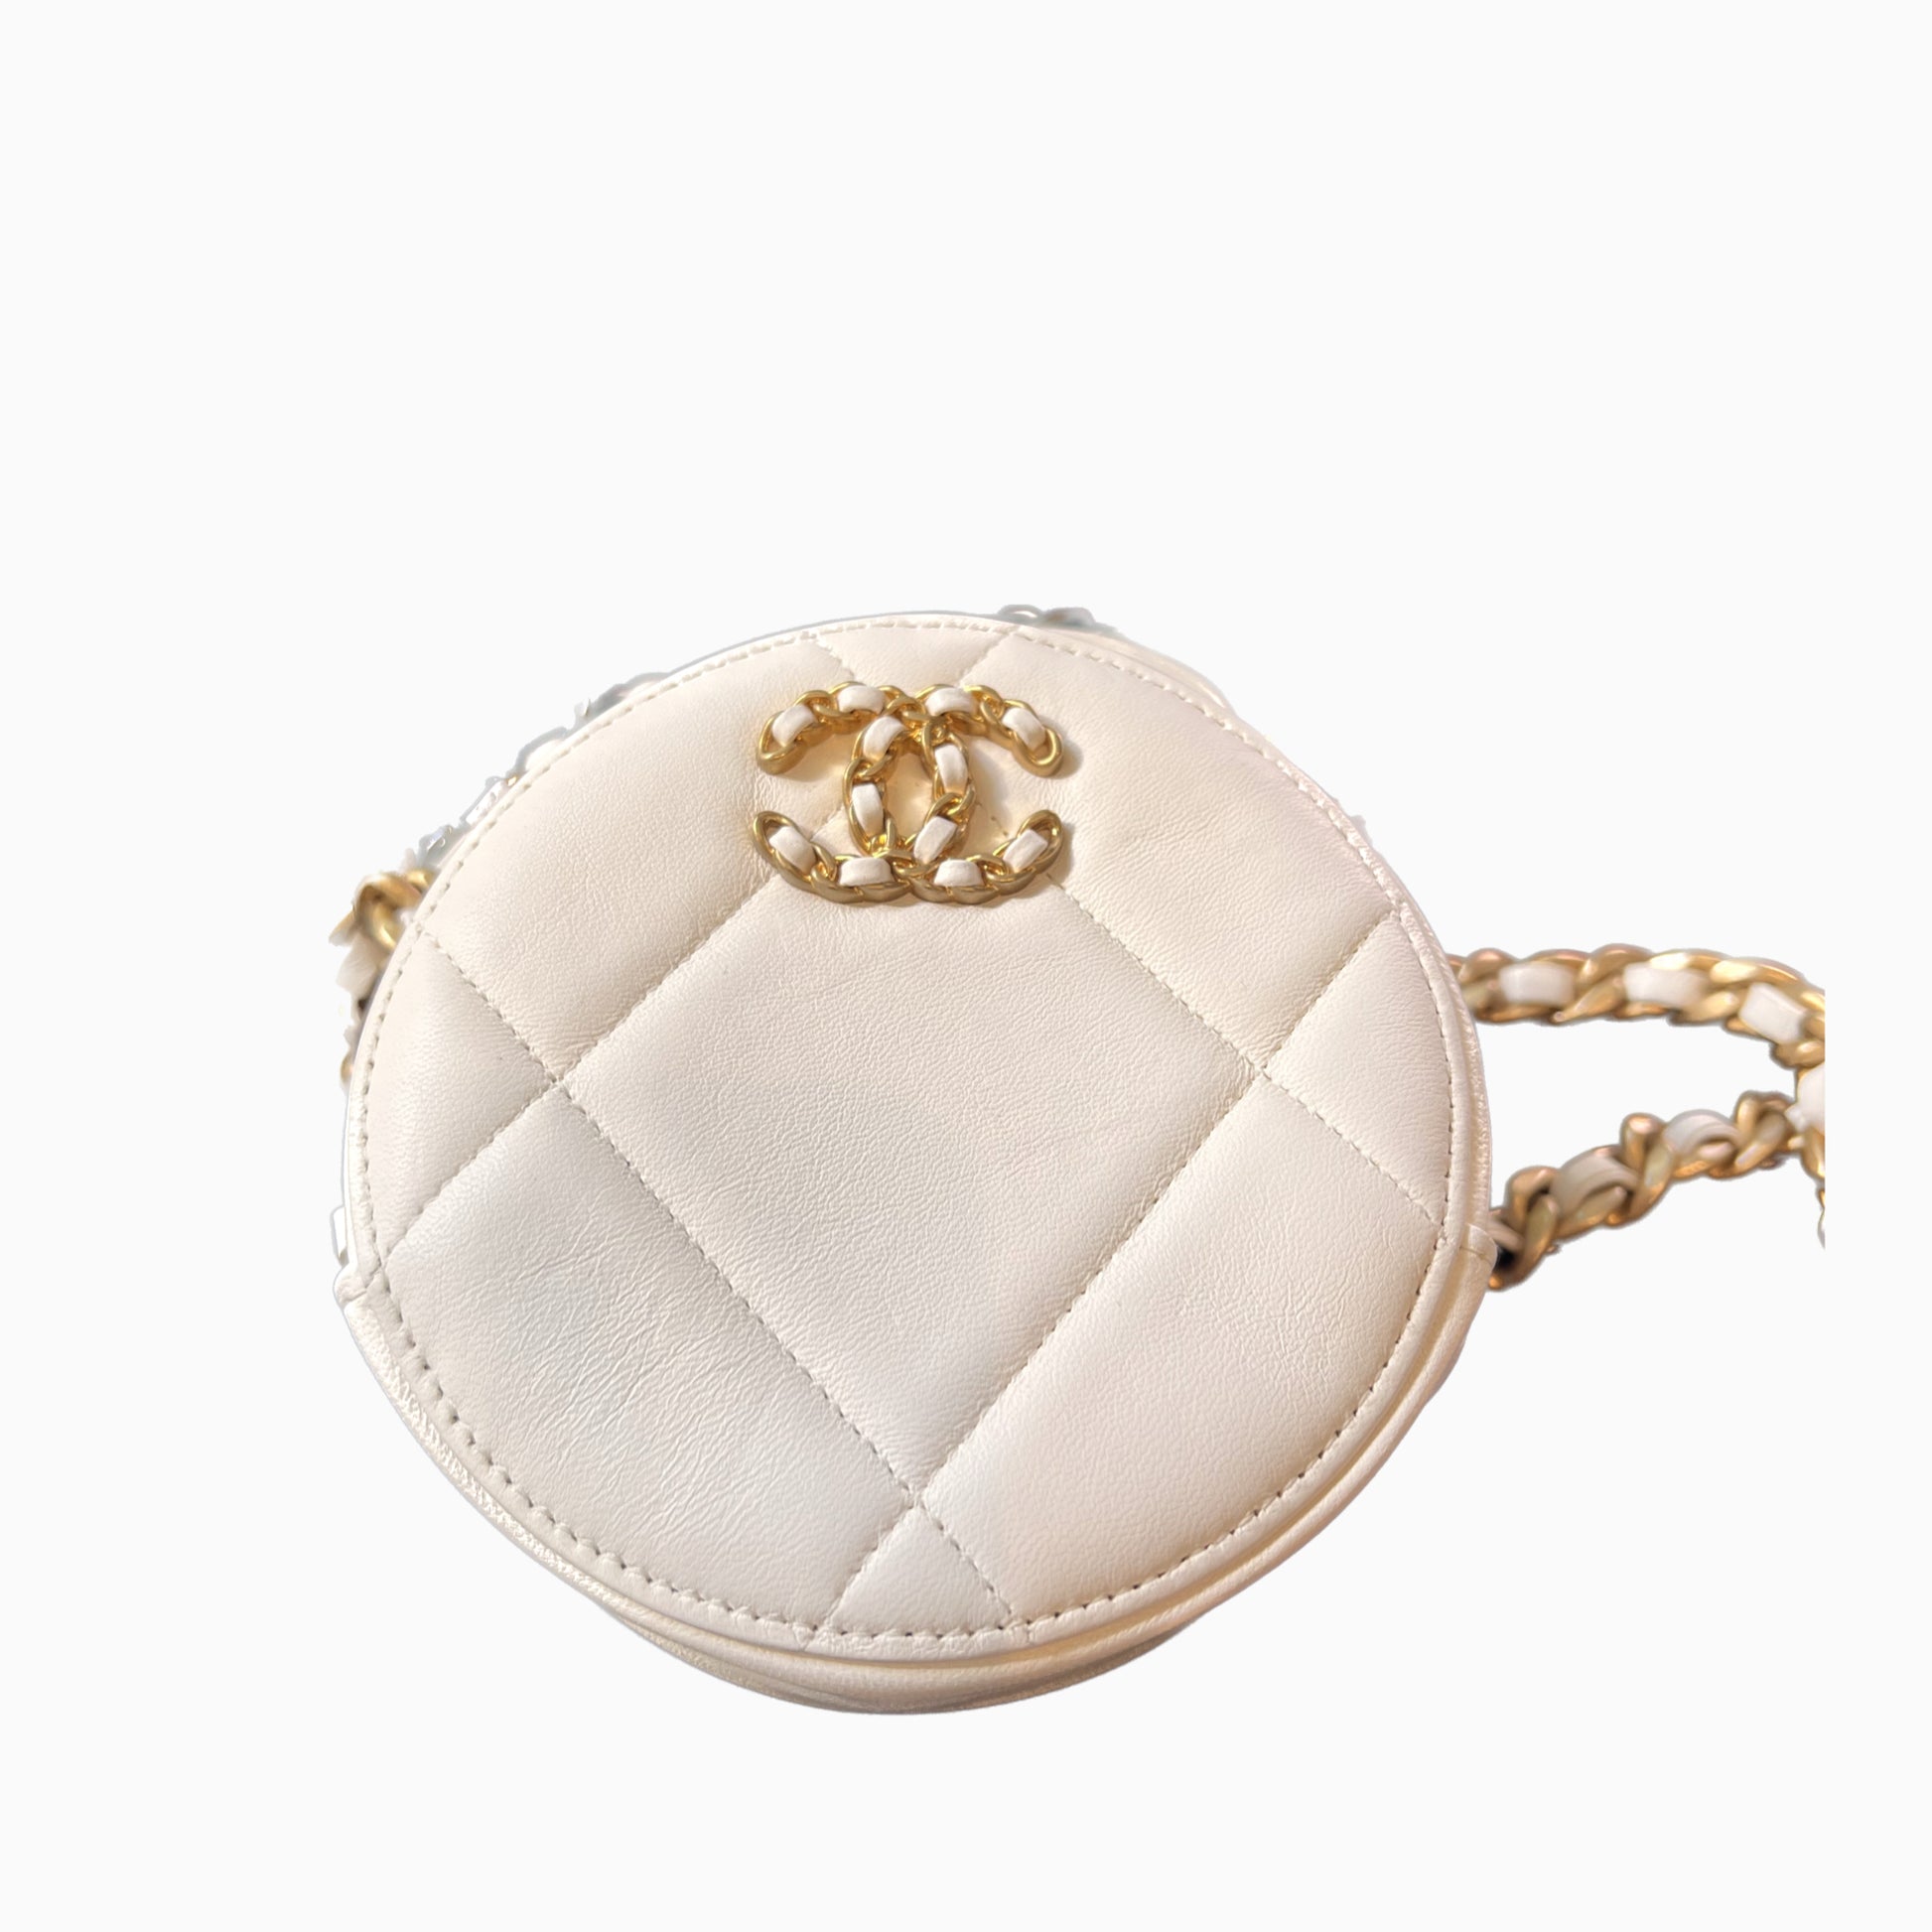 Chanel 19 Round Quilted Lambskin Leather Clutch Crossbody Bag